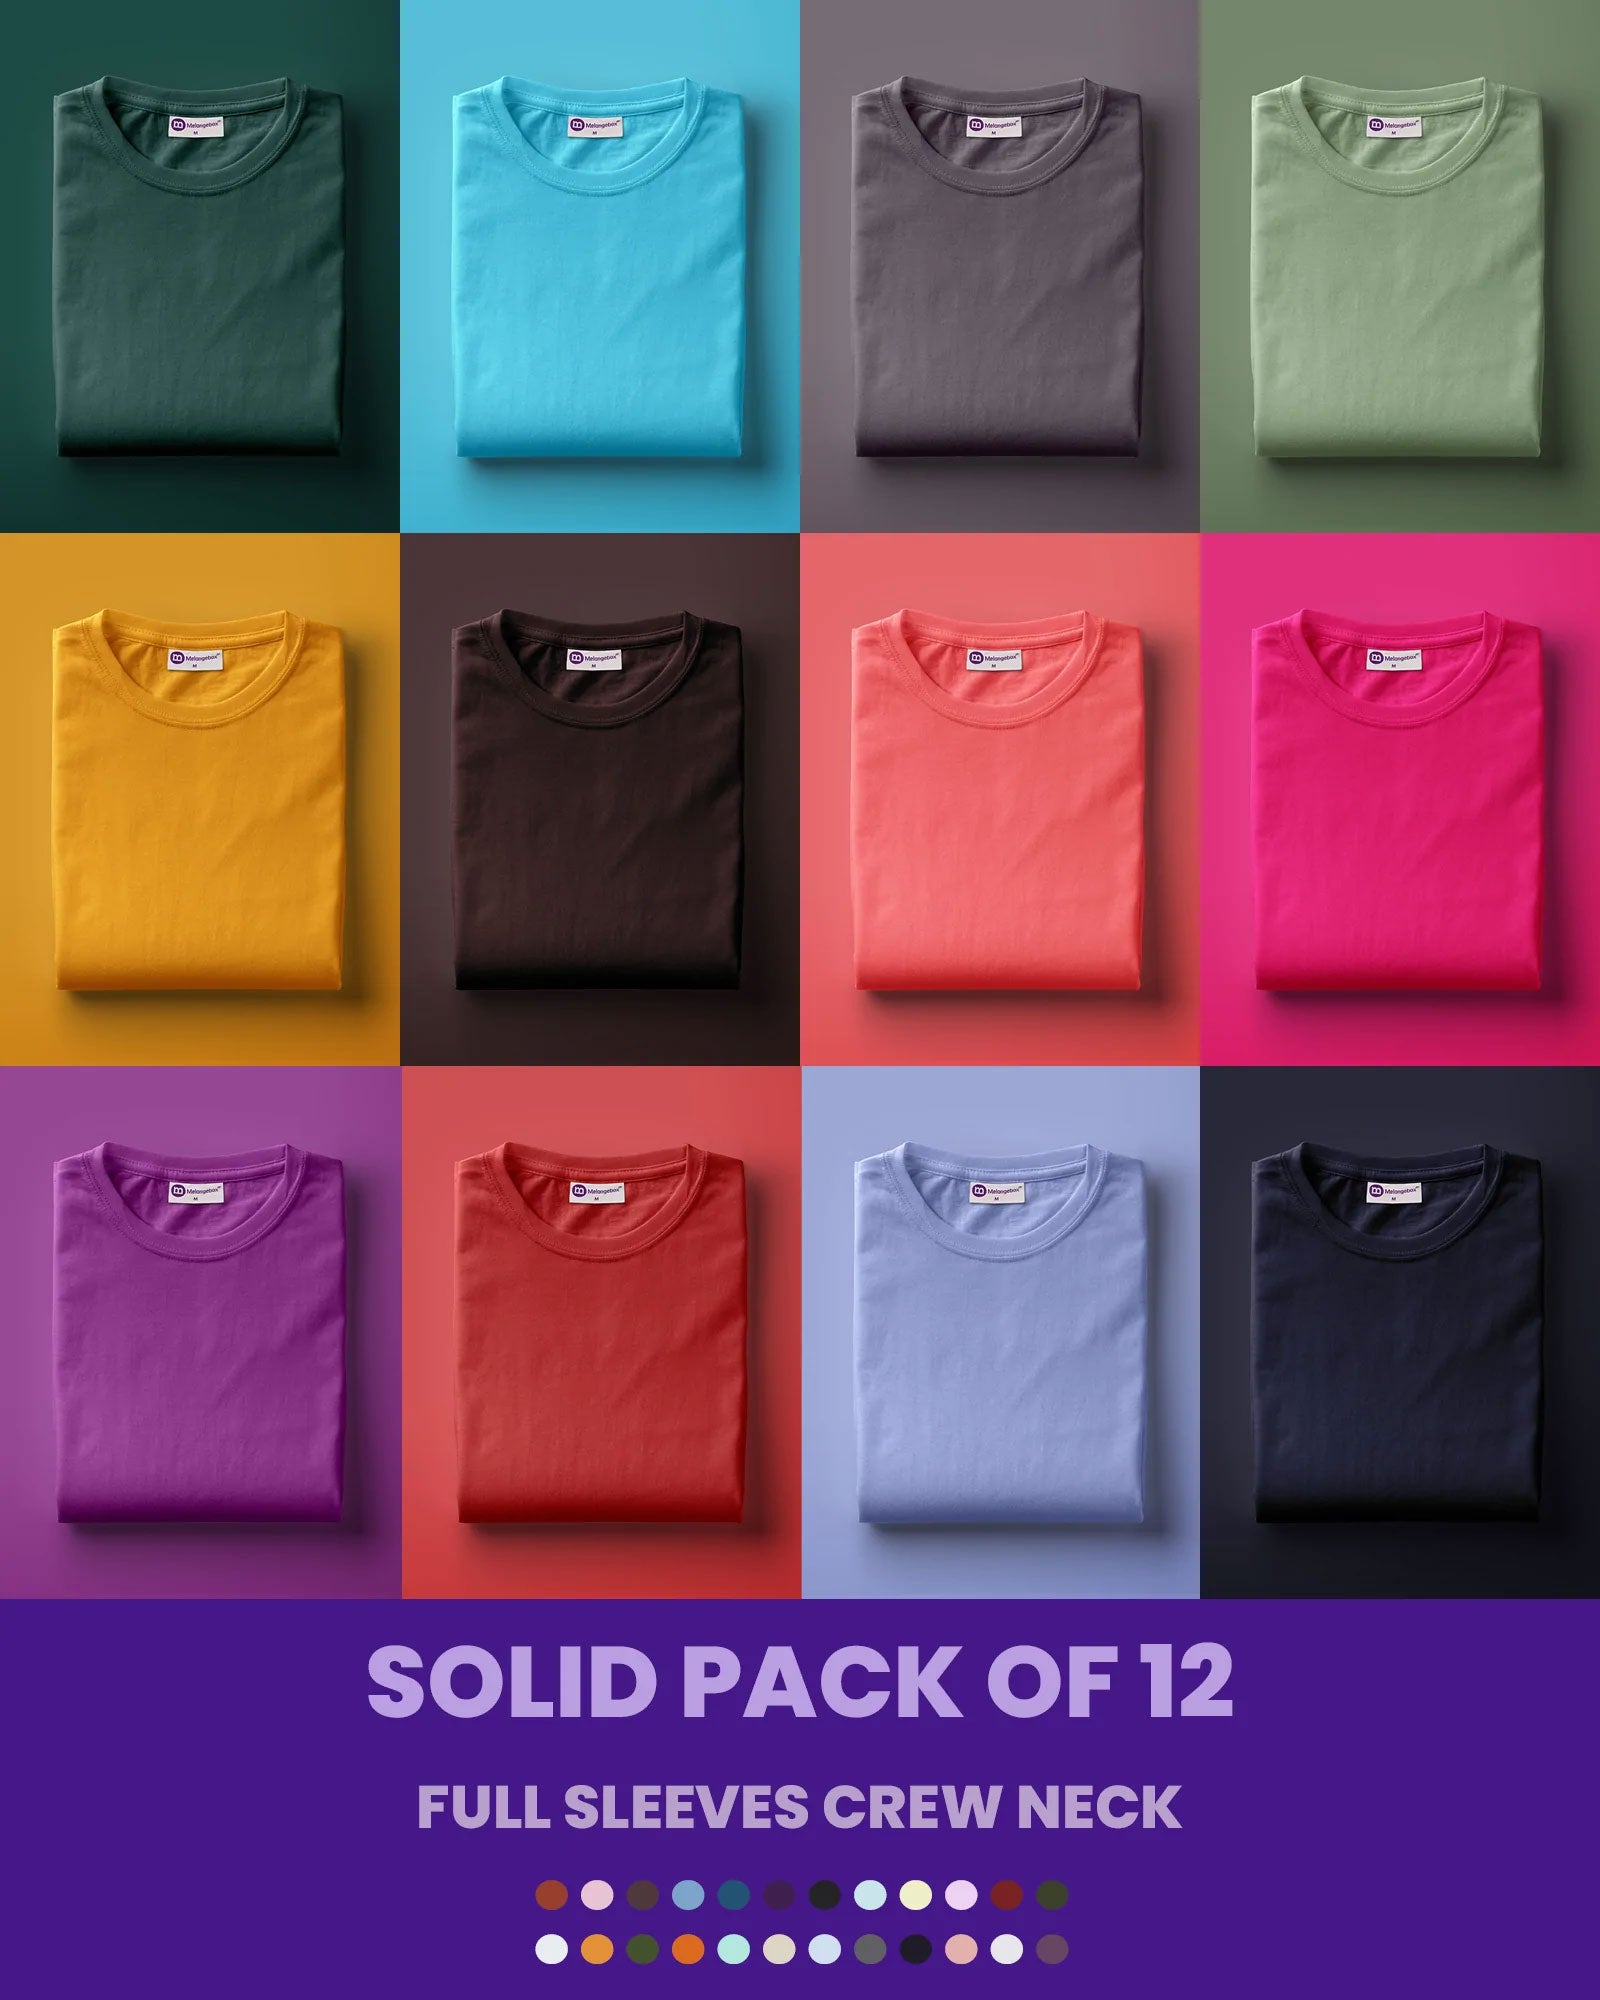 Solid Pack of 12: Full Sleeves Crew Neck